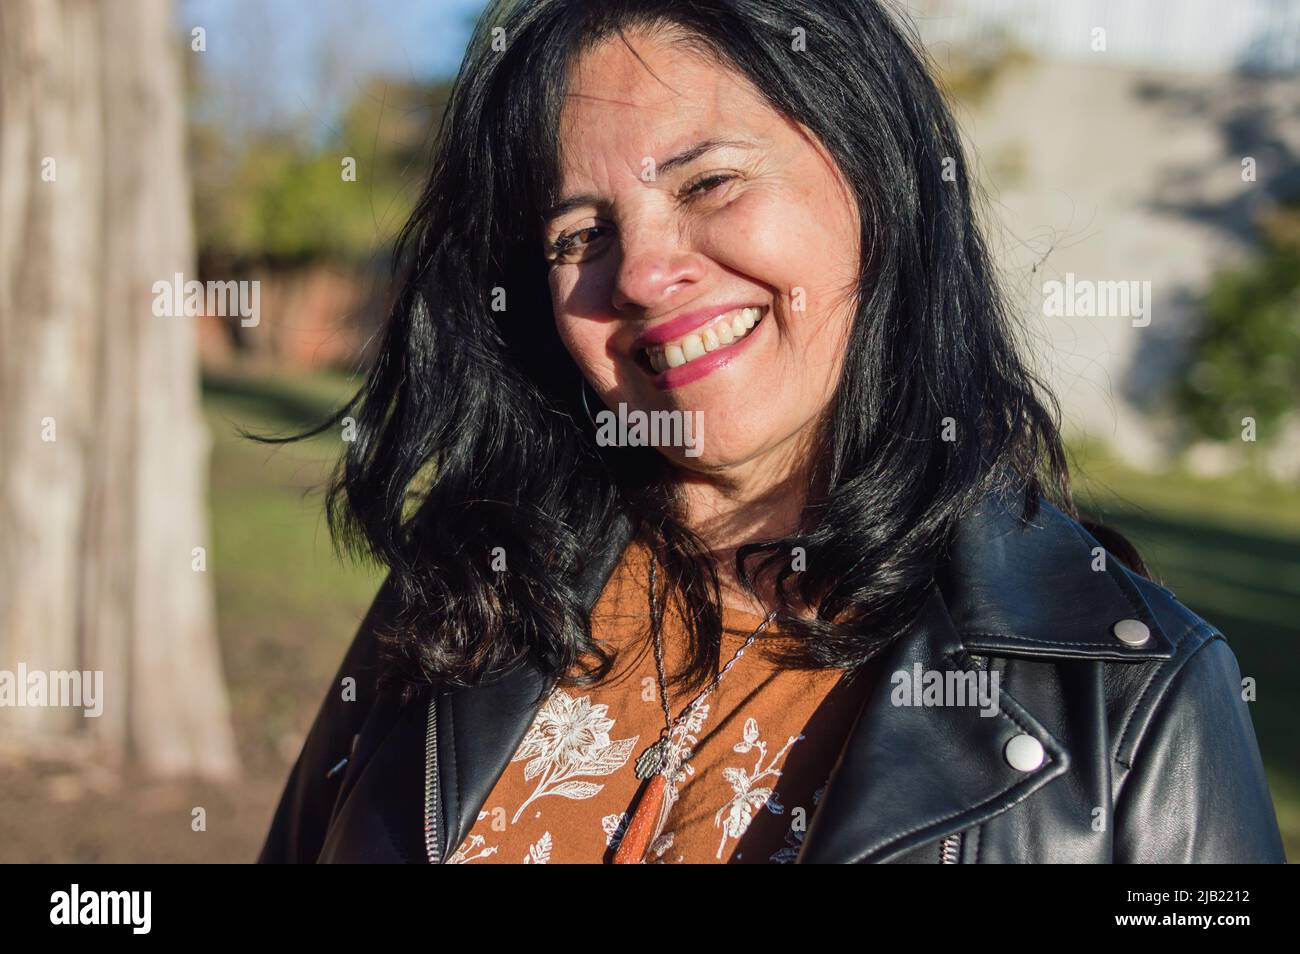 portrait beautiful adult latin woman outdoors as a tourist in a natural park, smiling looking at the camera, on a sunny day. Stock Photo